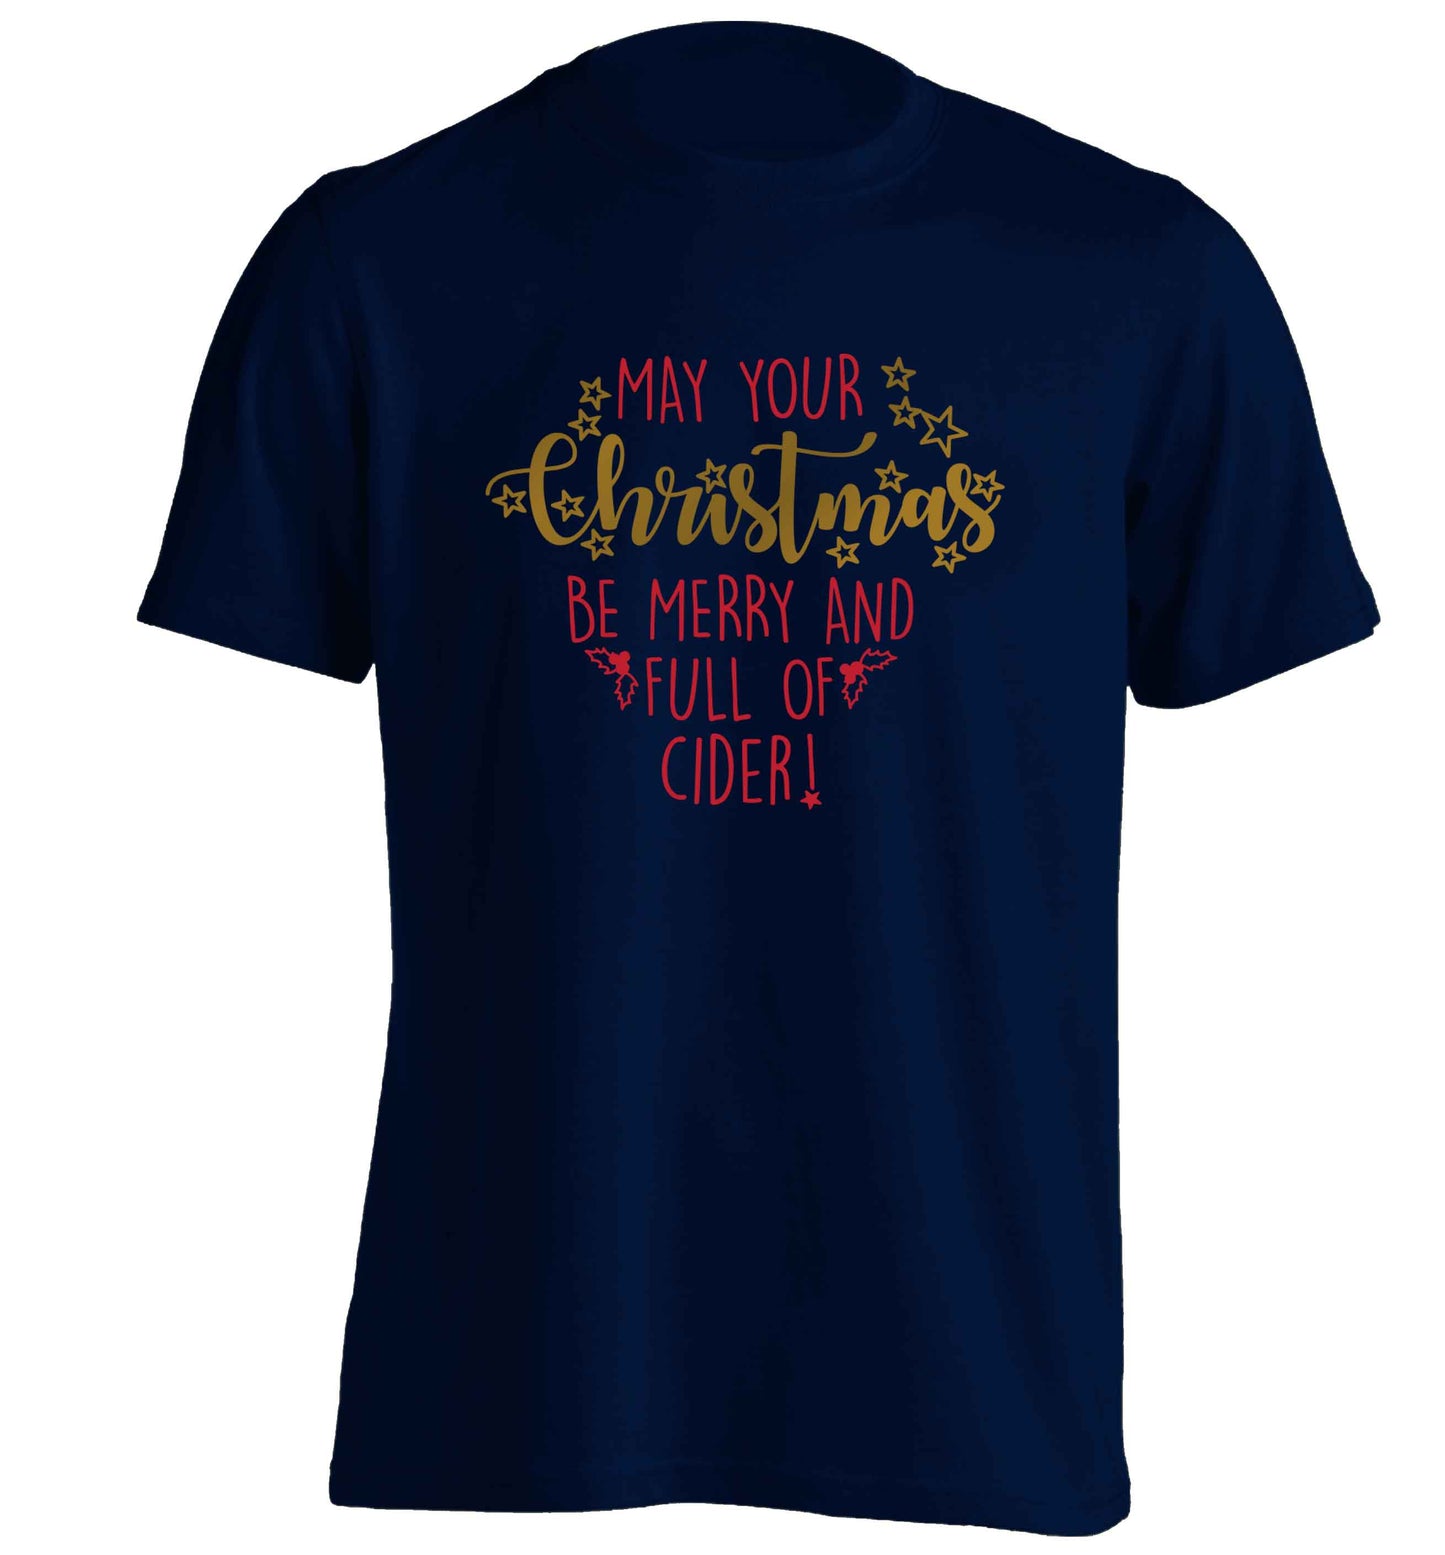 May your Christmas be merry and full of cider adults unisex navy Tshirt 2XL